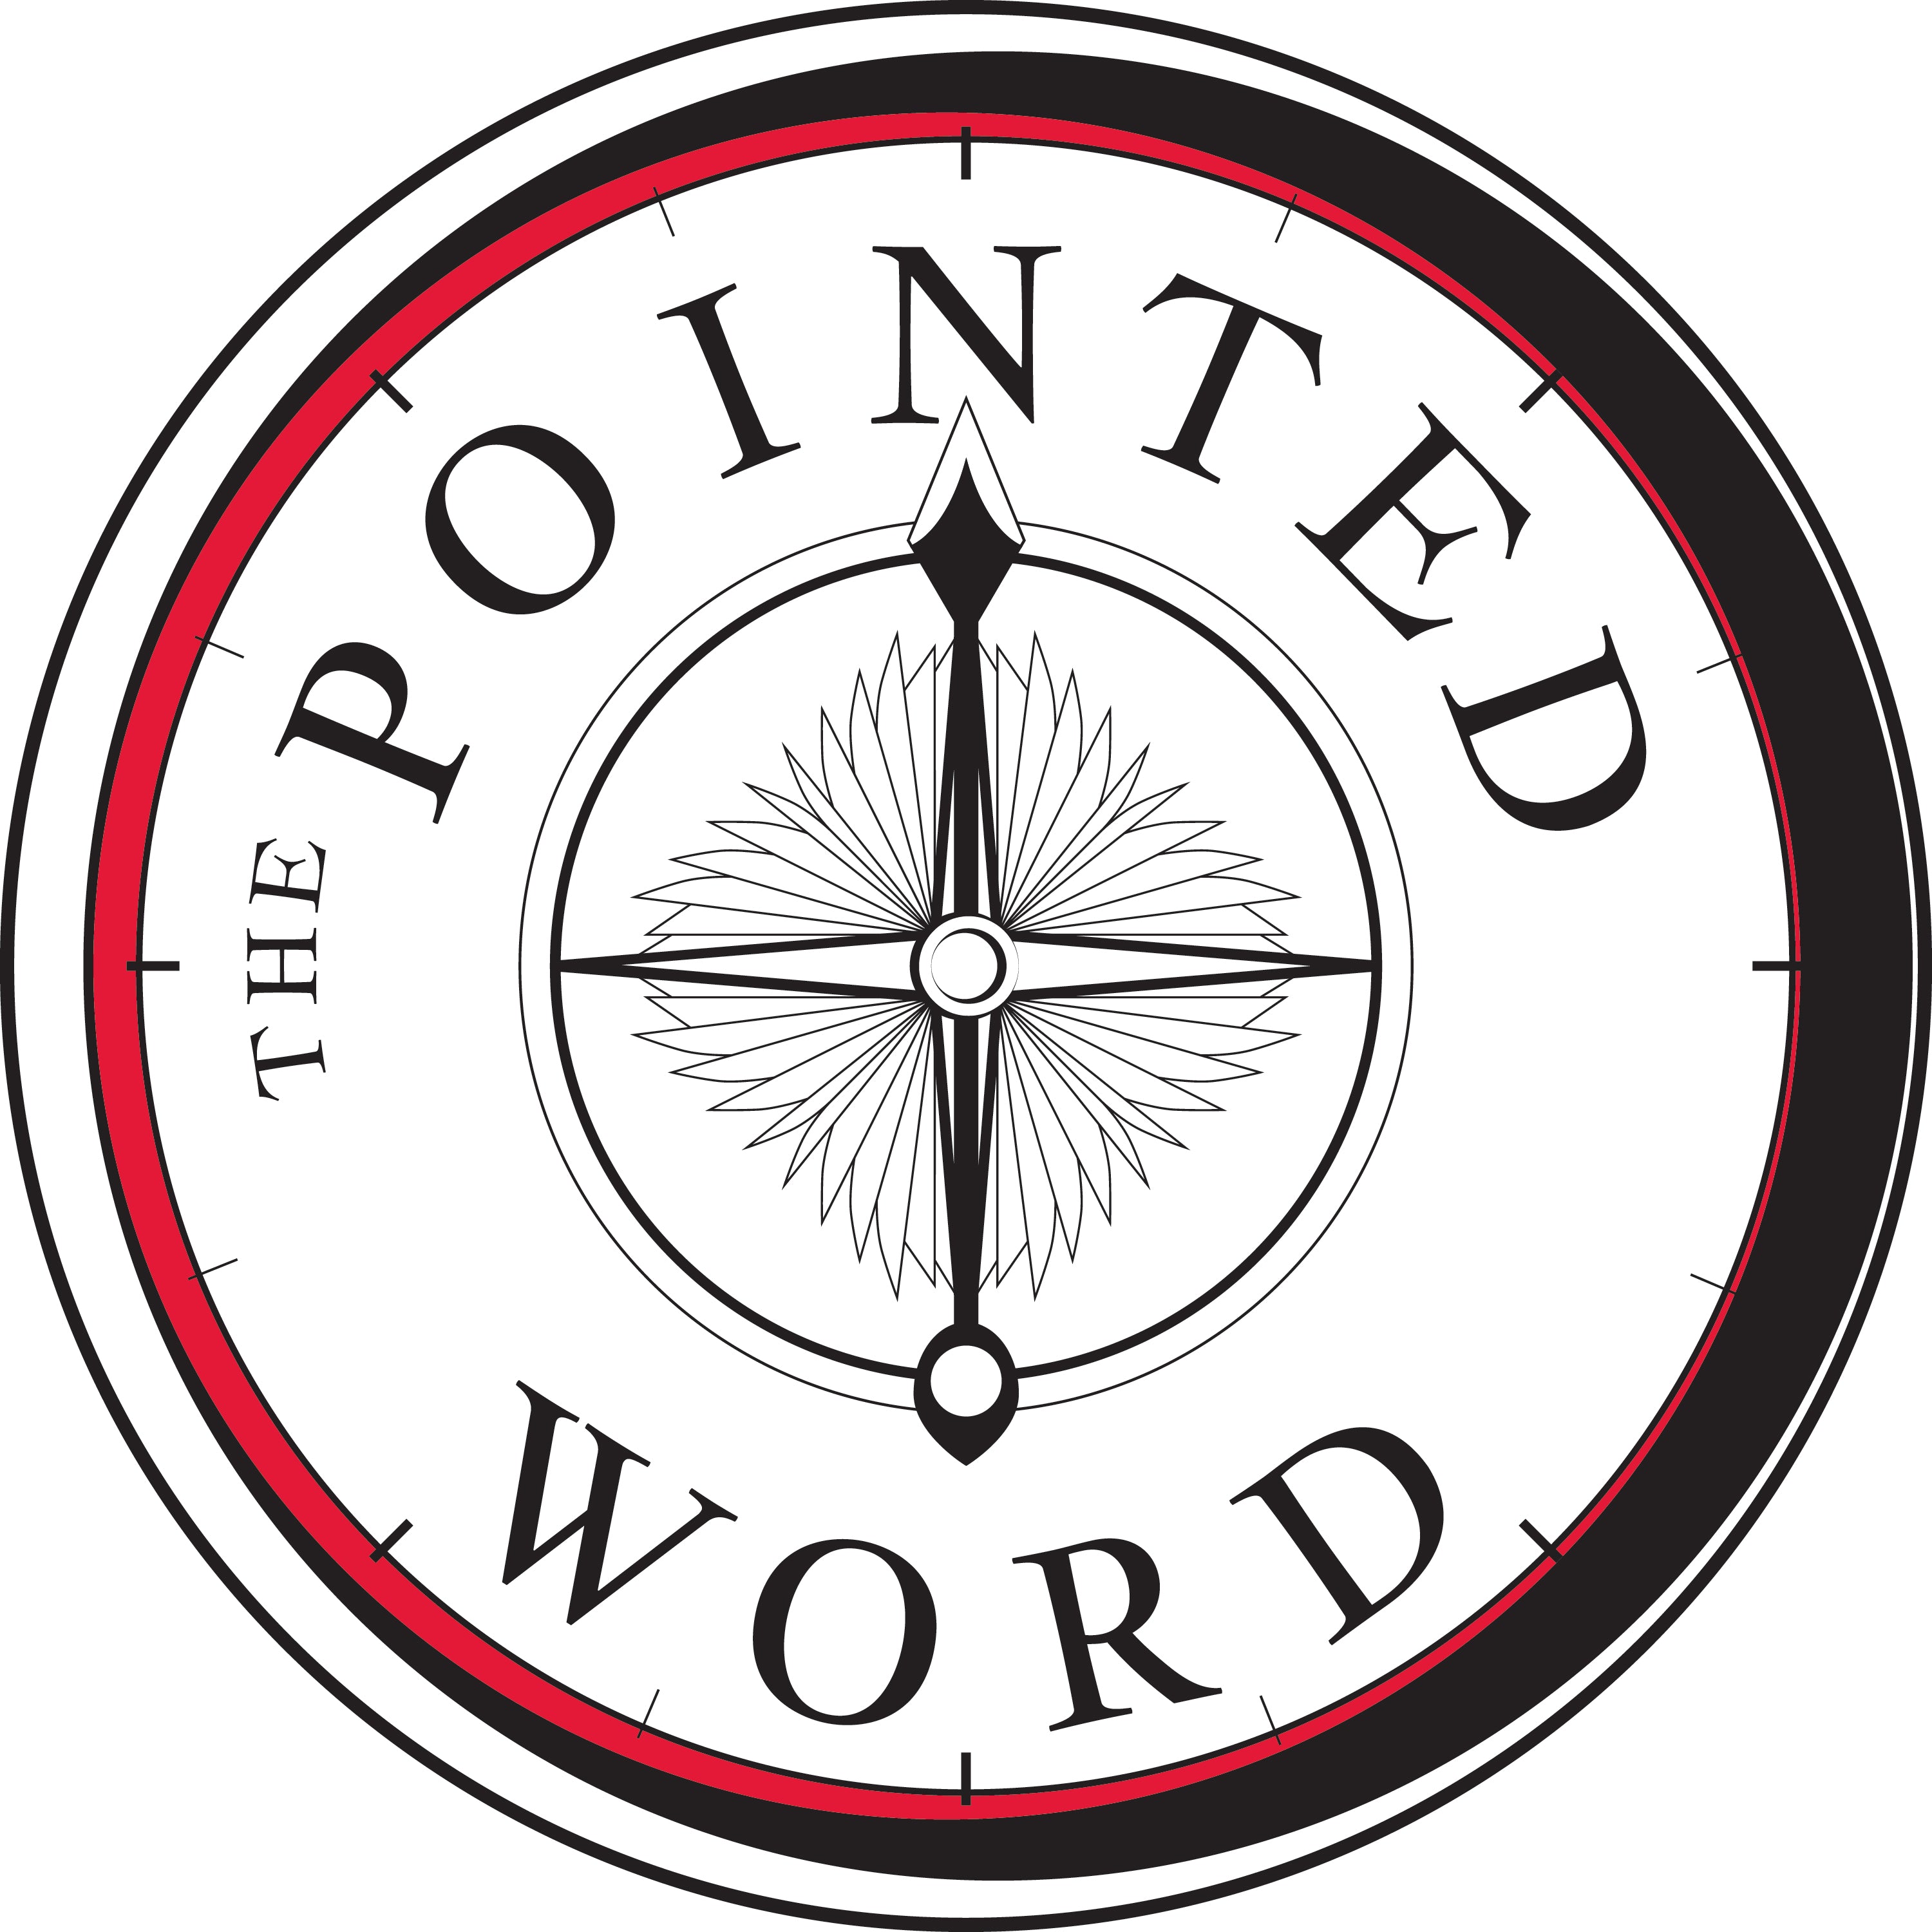 The Pointed Word